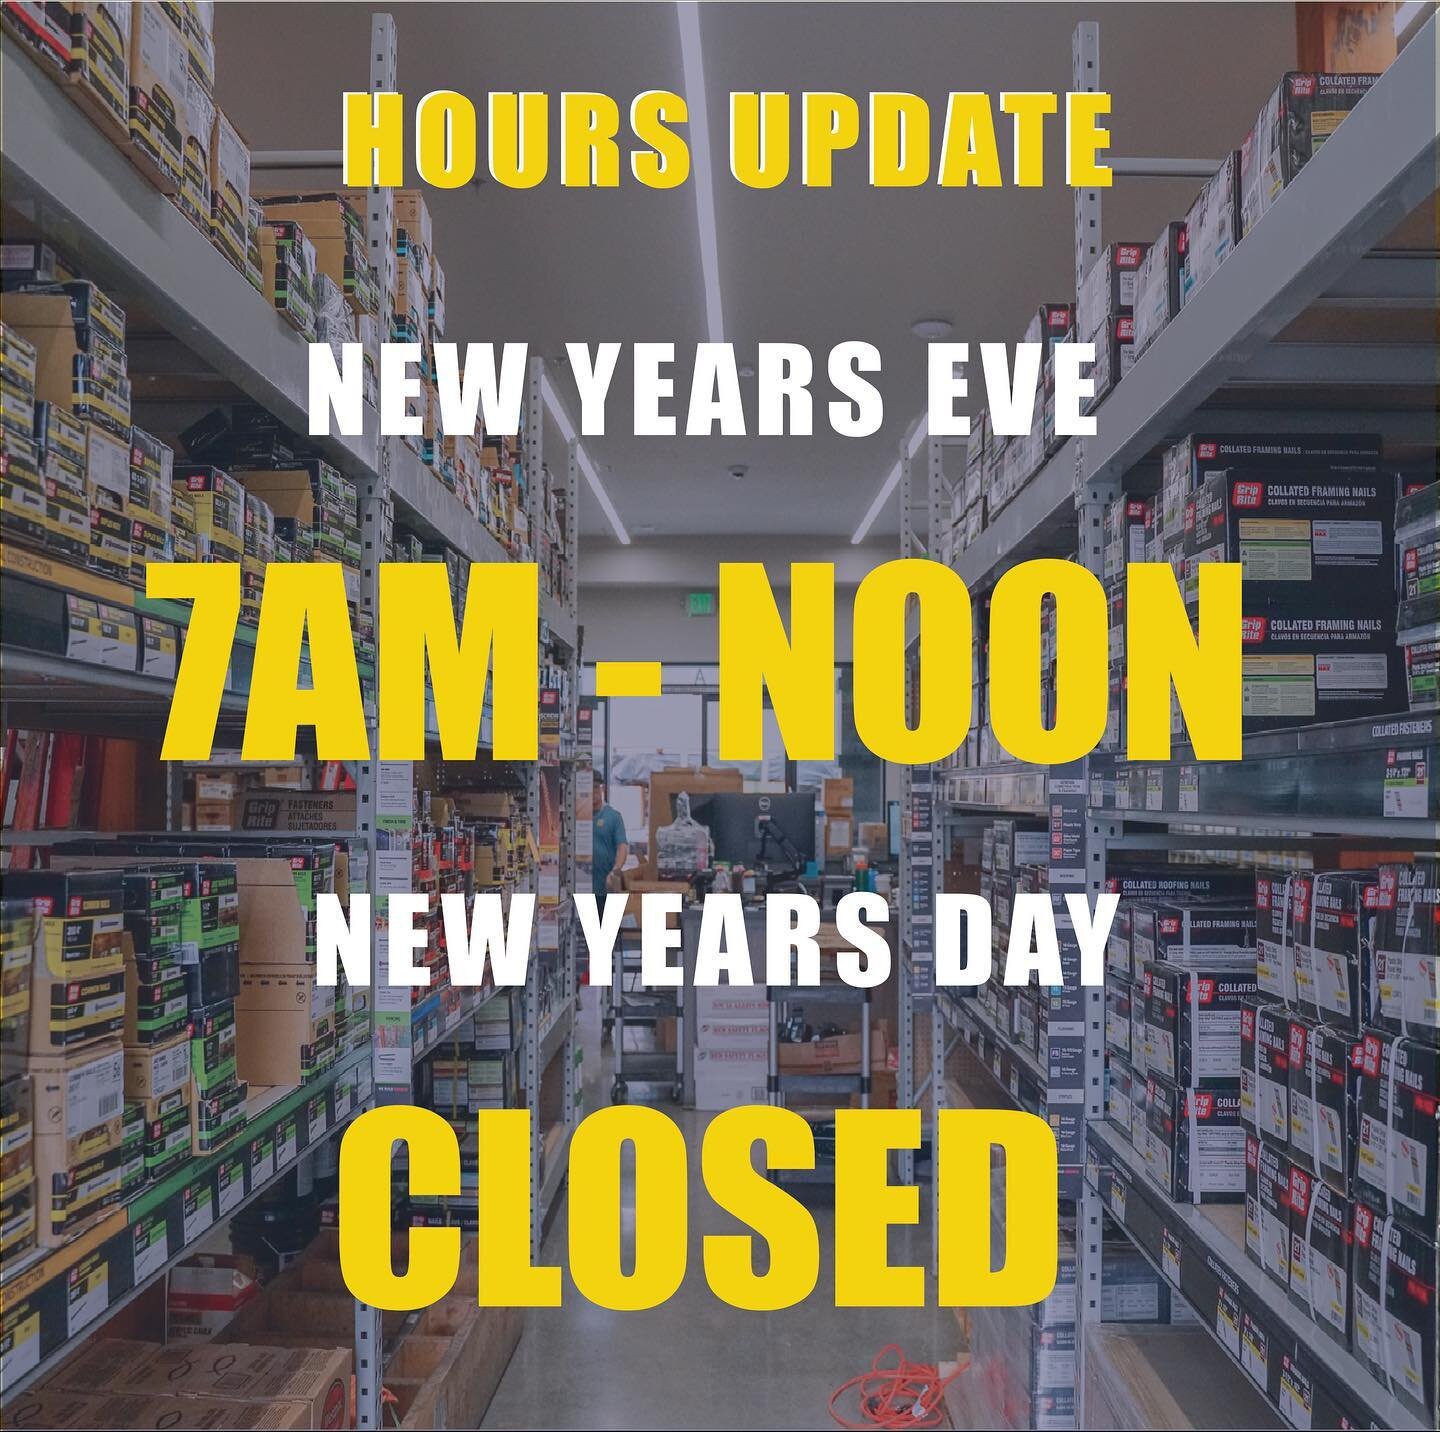 Hours Update! Hope everyone has a happy + safe holiday and can&rsquo;t wait to see you all in 2021!